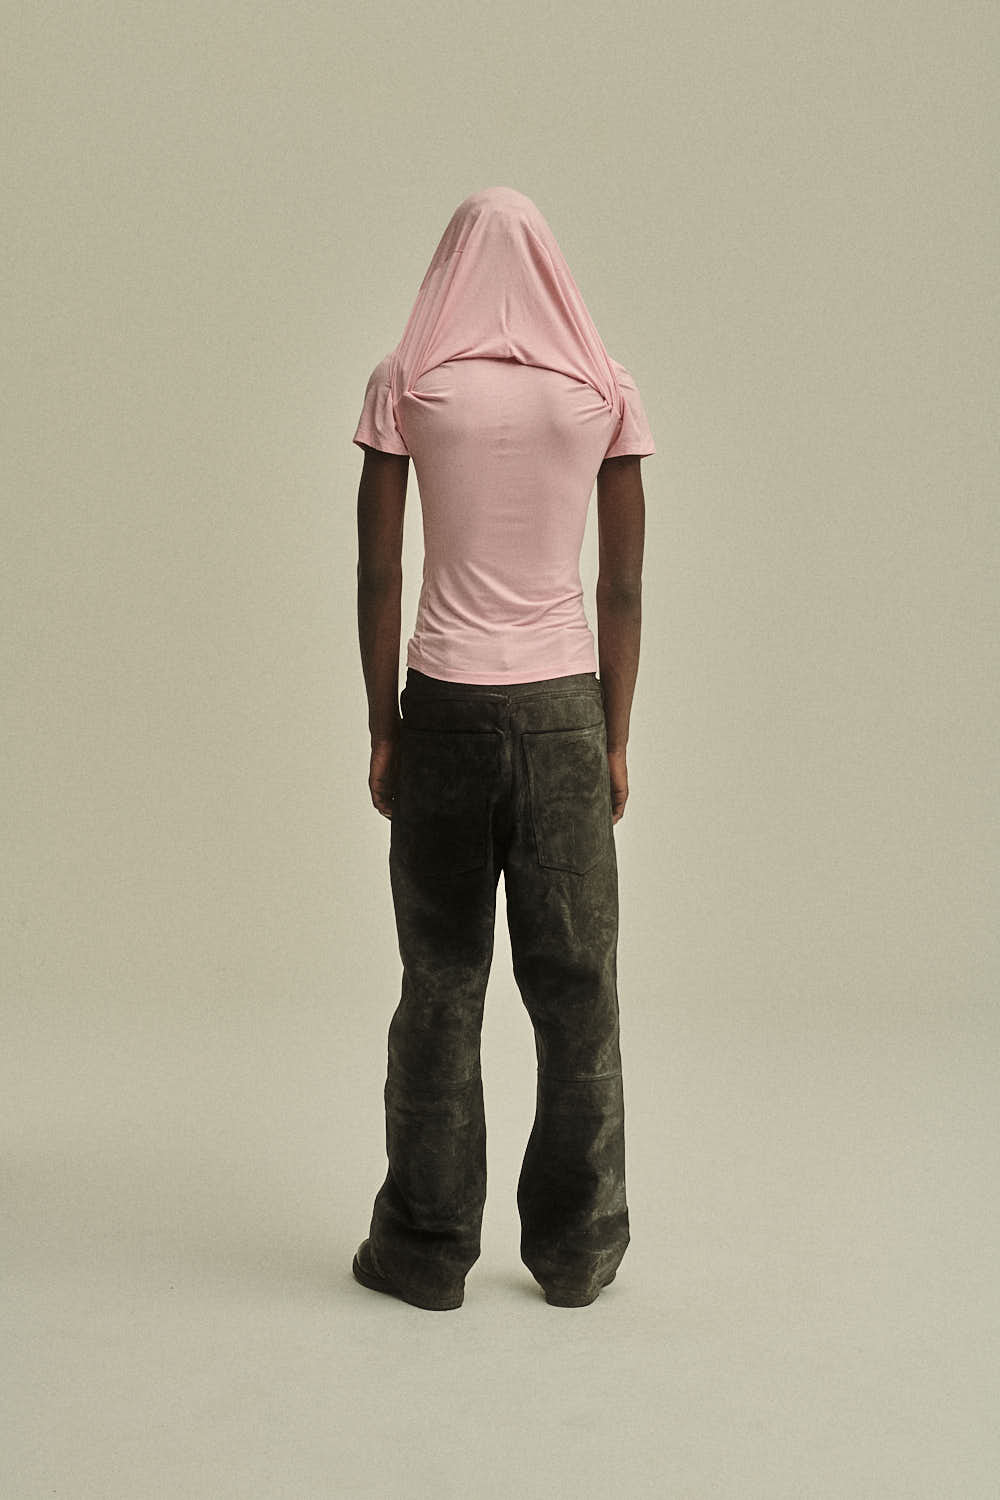 TIGHT HOODED T-SHIRT - PINK